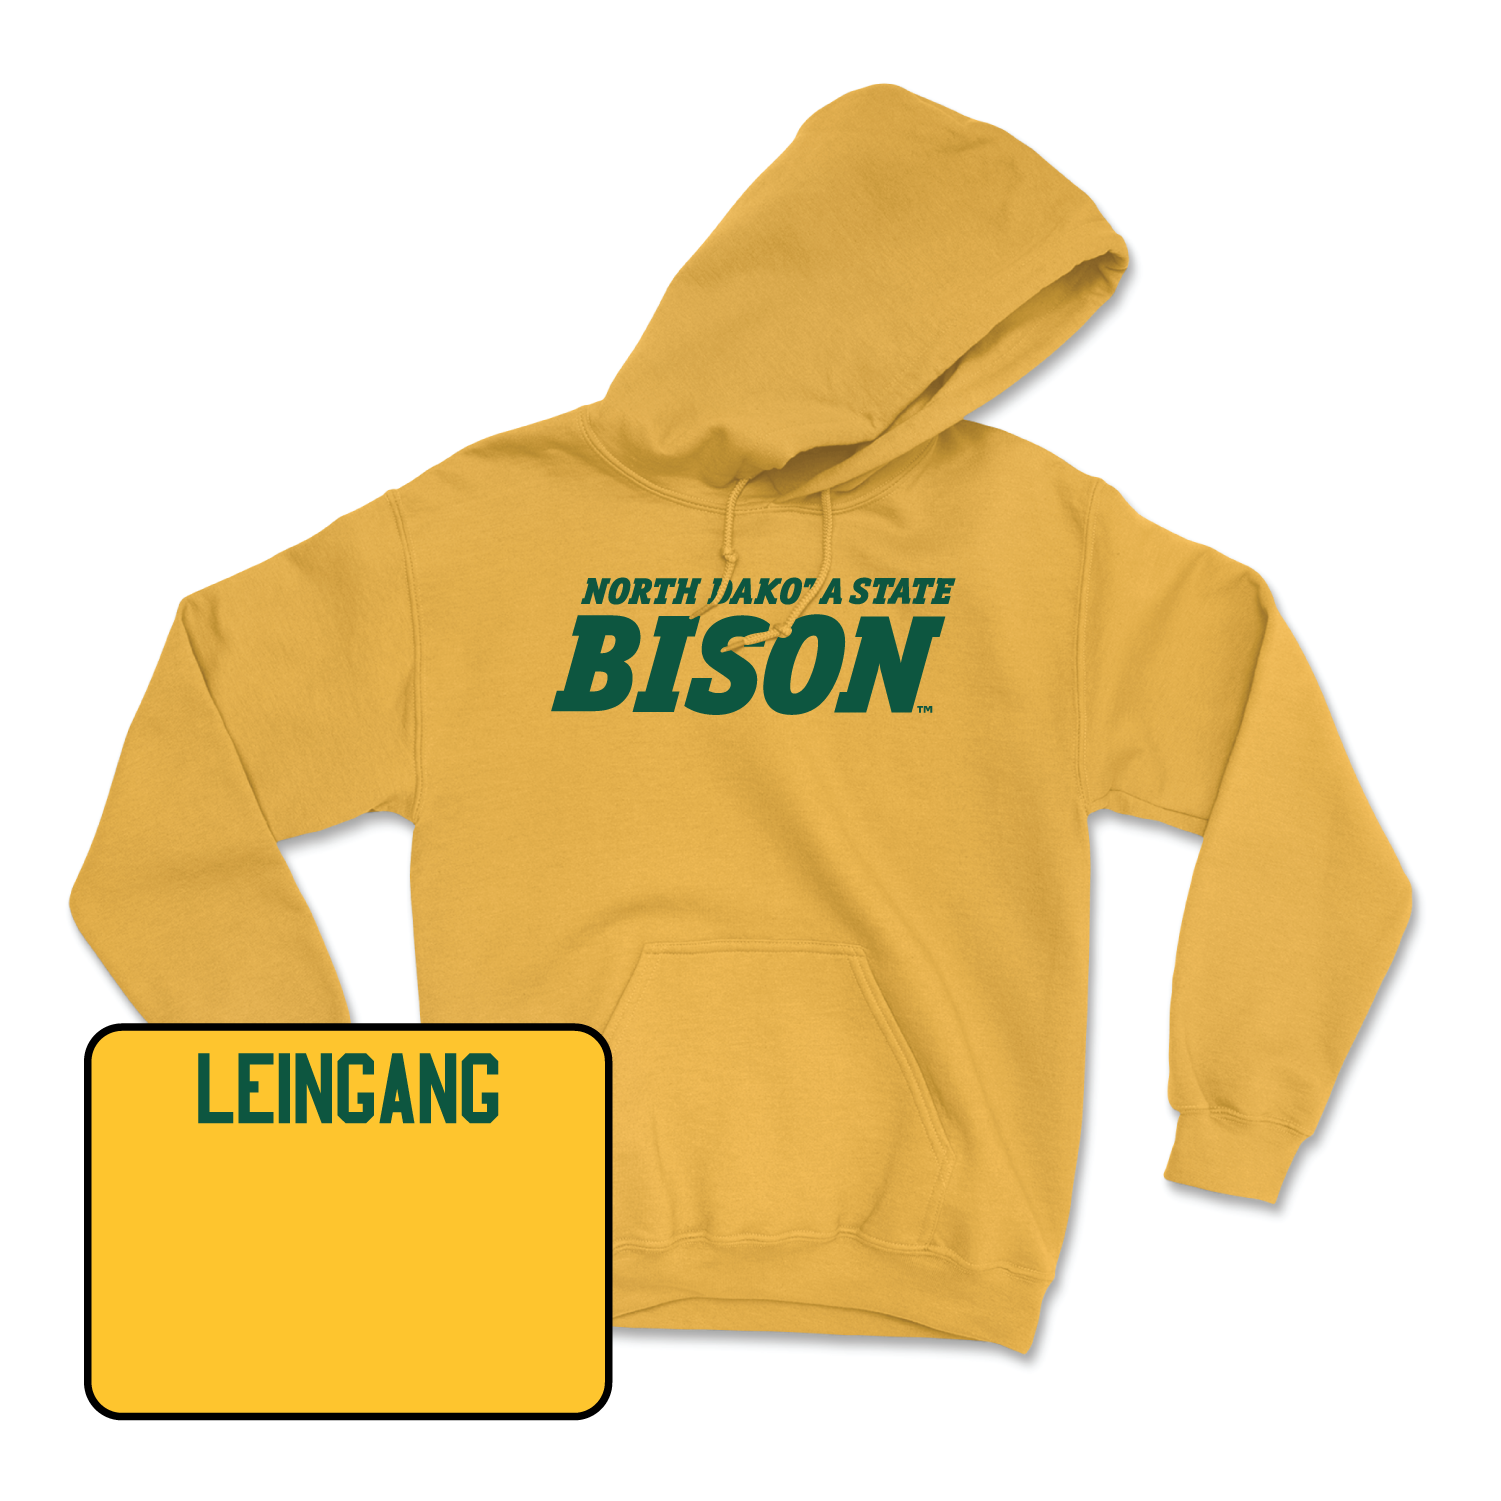 Gold Track & Field Bison Hoodie 2 4X-Large / Taylor Leingang